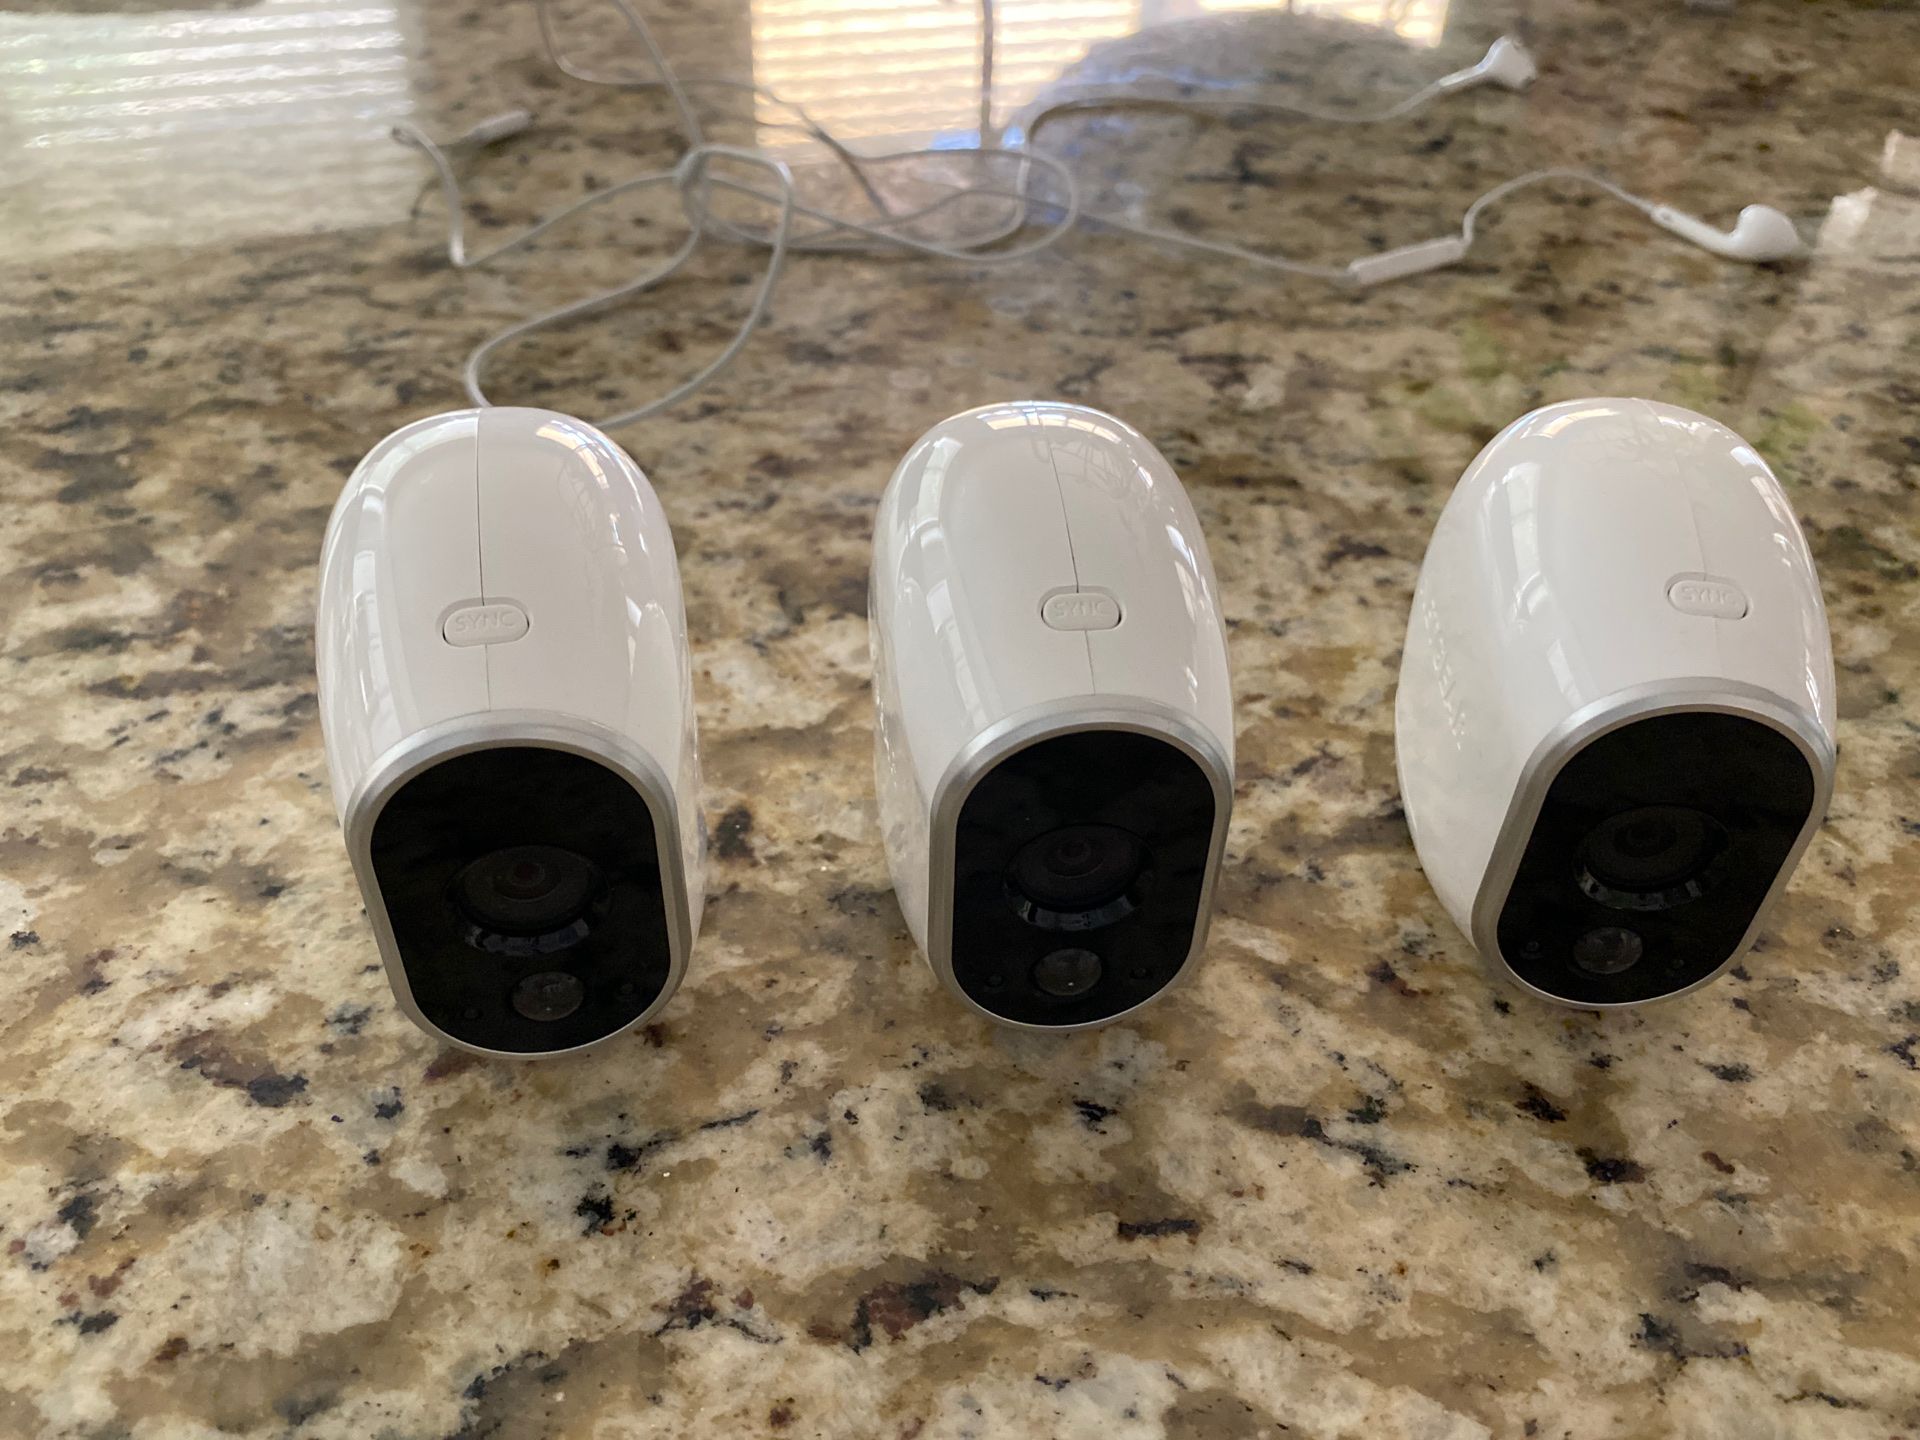 4 Arlo Cameras with rechargeable barriers and charger